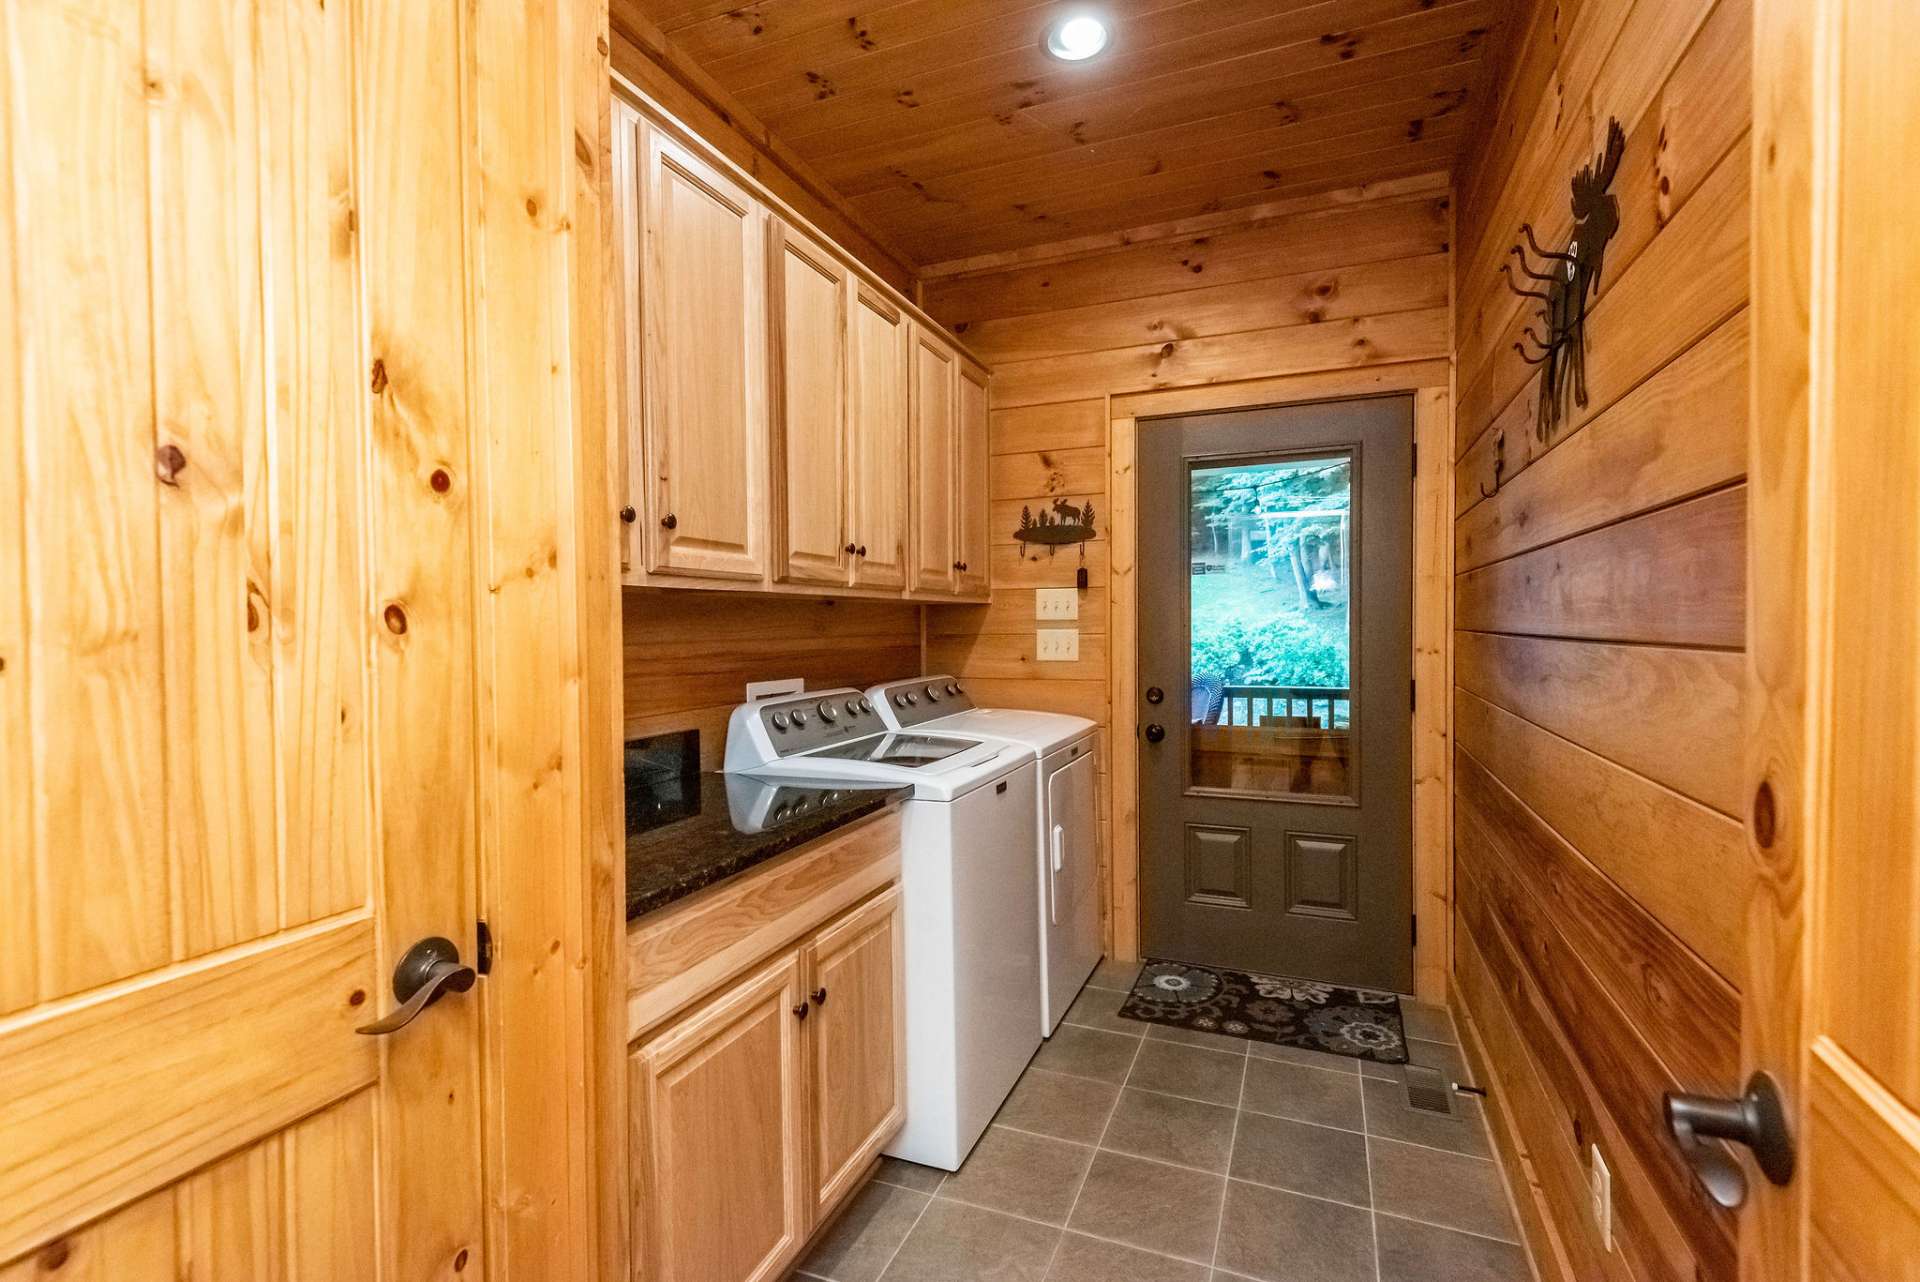 Come in from playing outside to this mud room equipped with extra storage, laundry, and tile flooring.